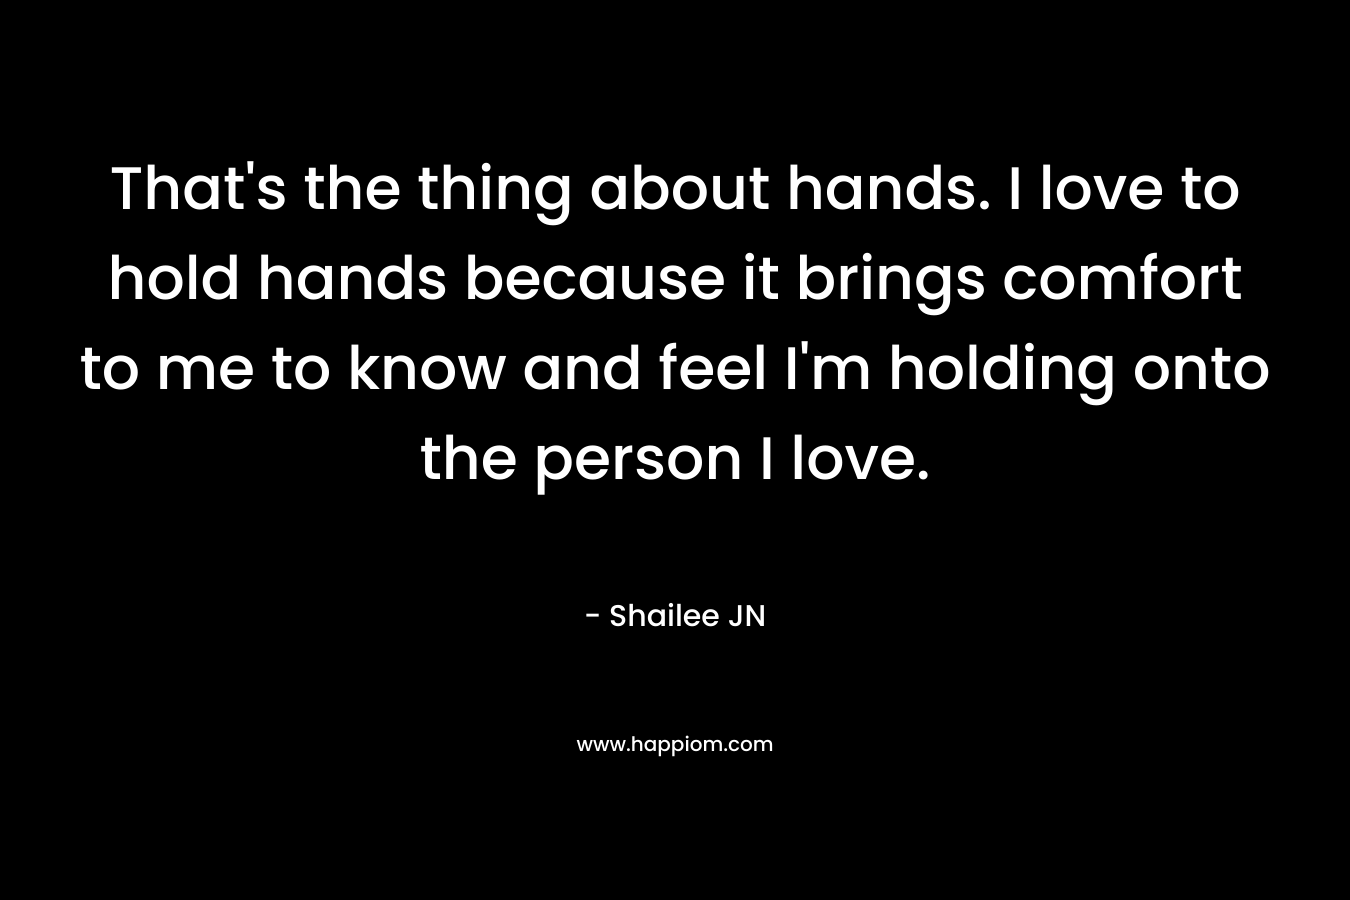 That's the thing about hands. I love to hold hands because it brings comfort to me to know and feel I'm holding onto the person I love.